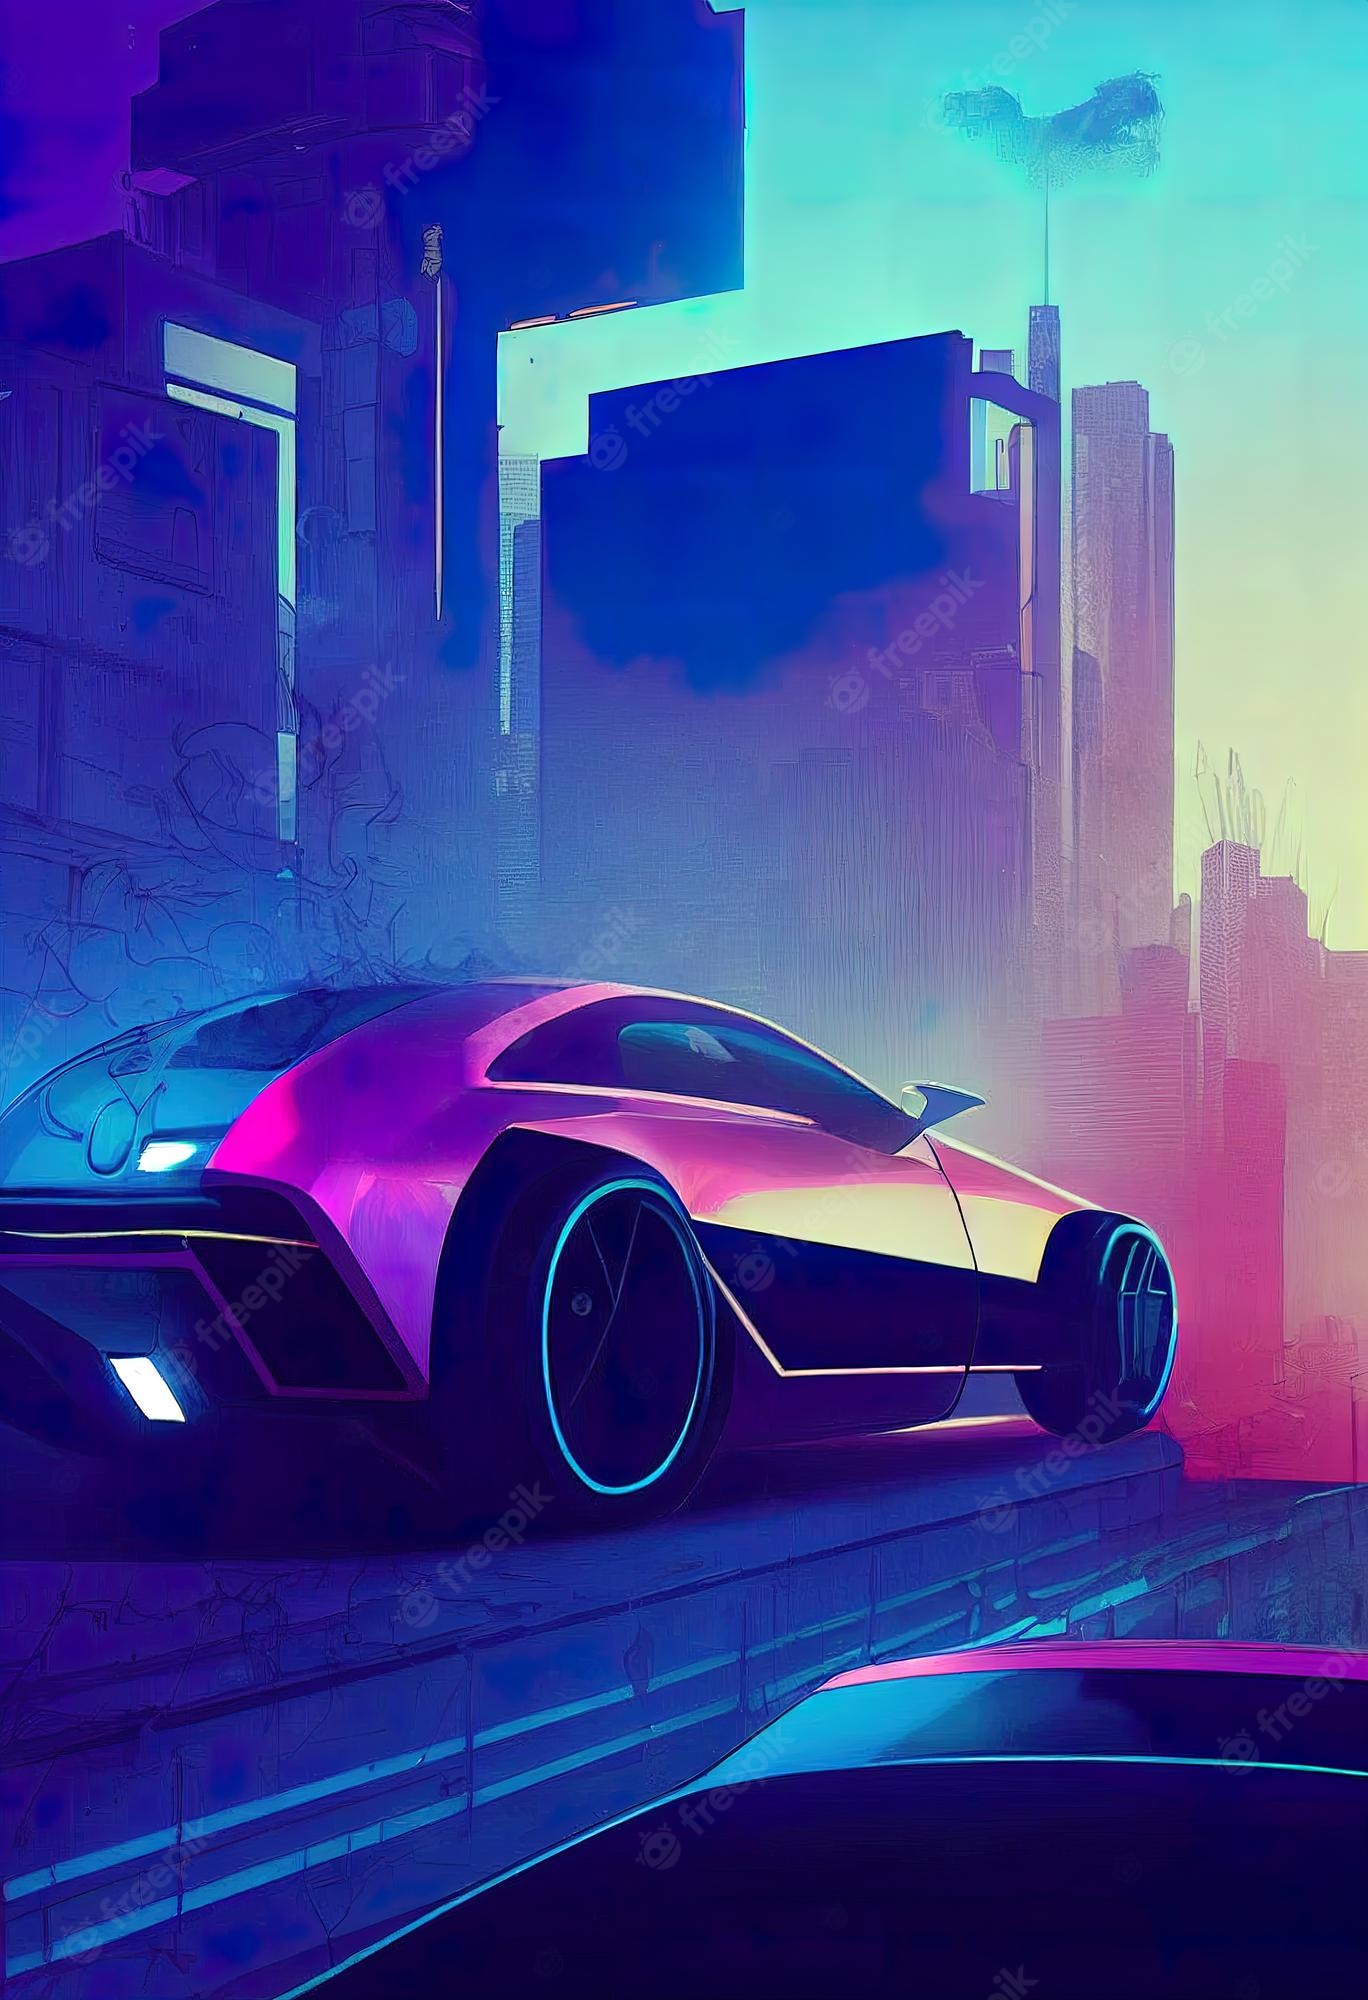 Outrun Style Car Moving On The Bridge Wallpapers